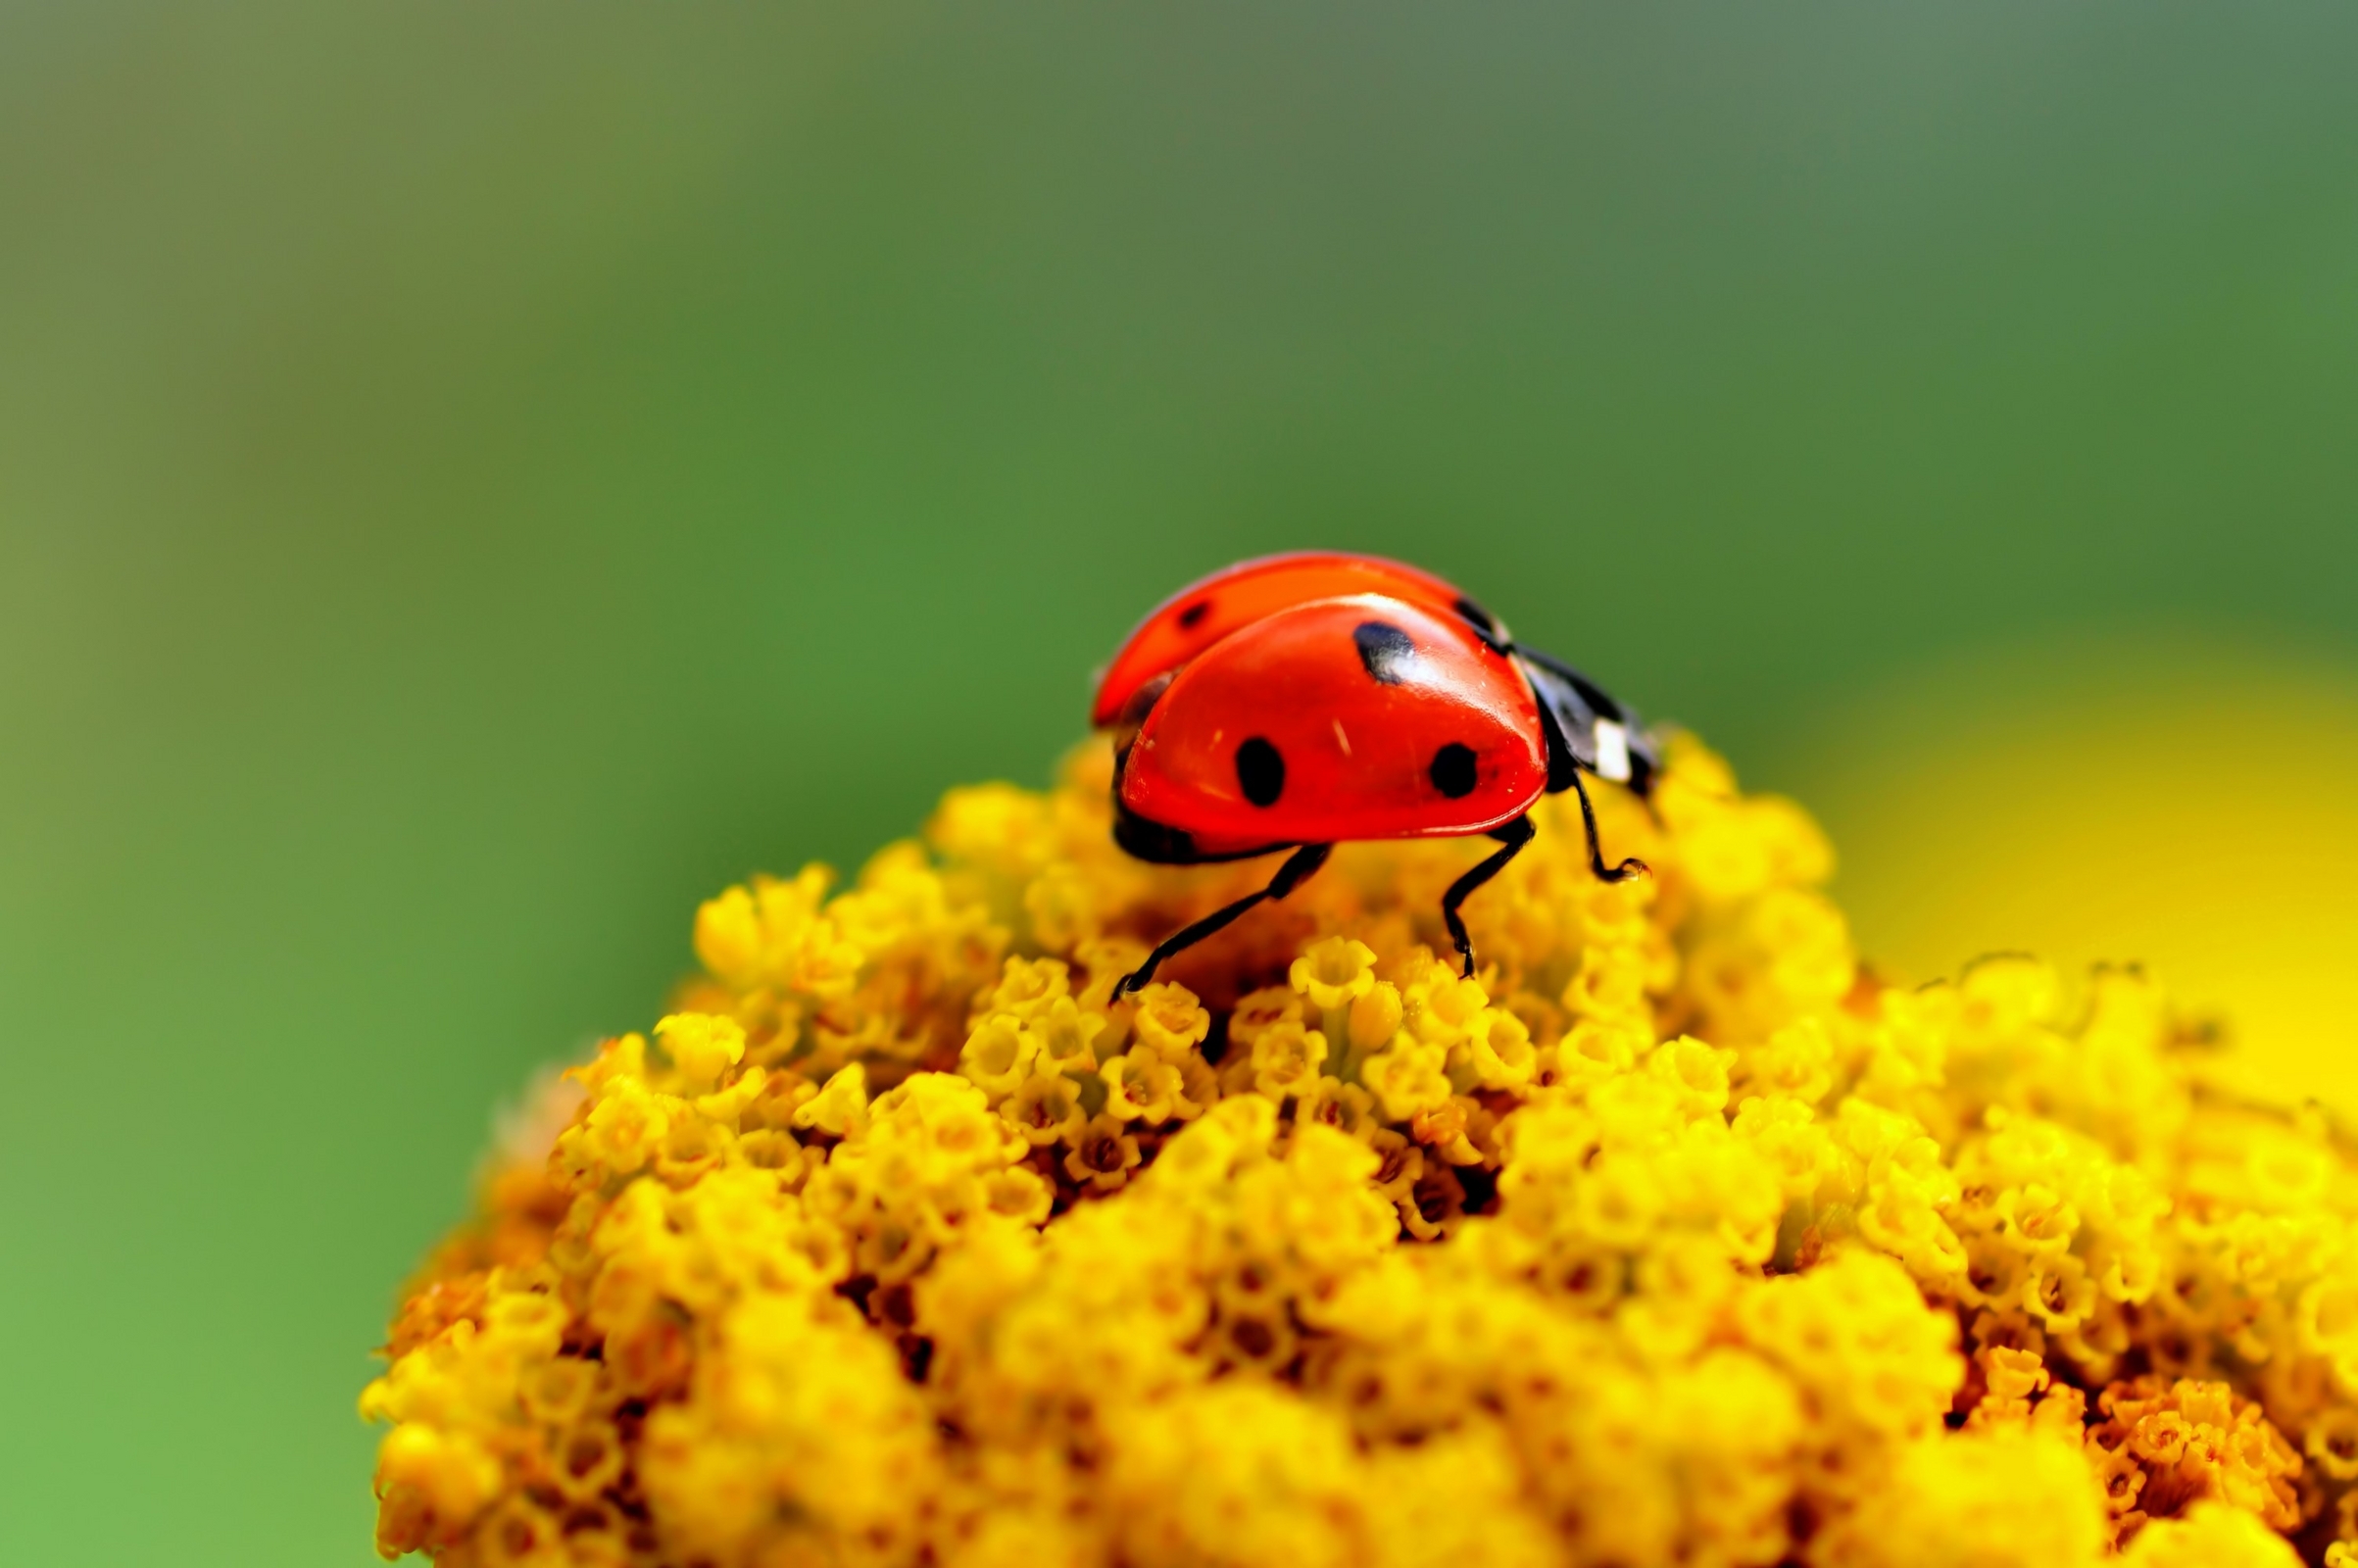 New Lock Screen Wallpapers insects, ladybugs